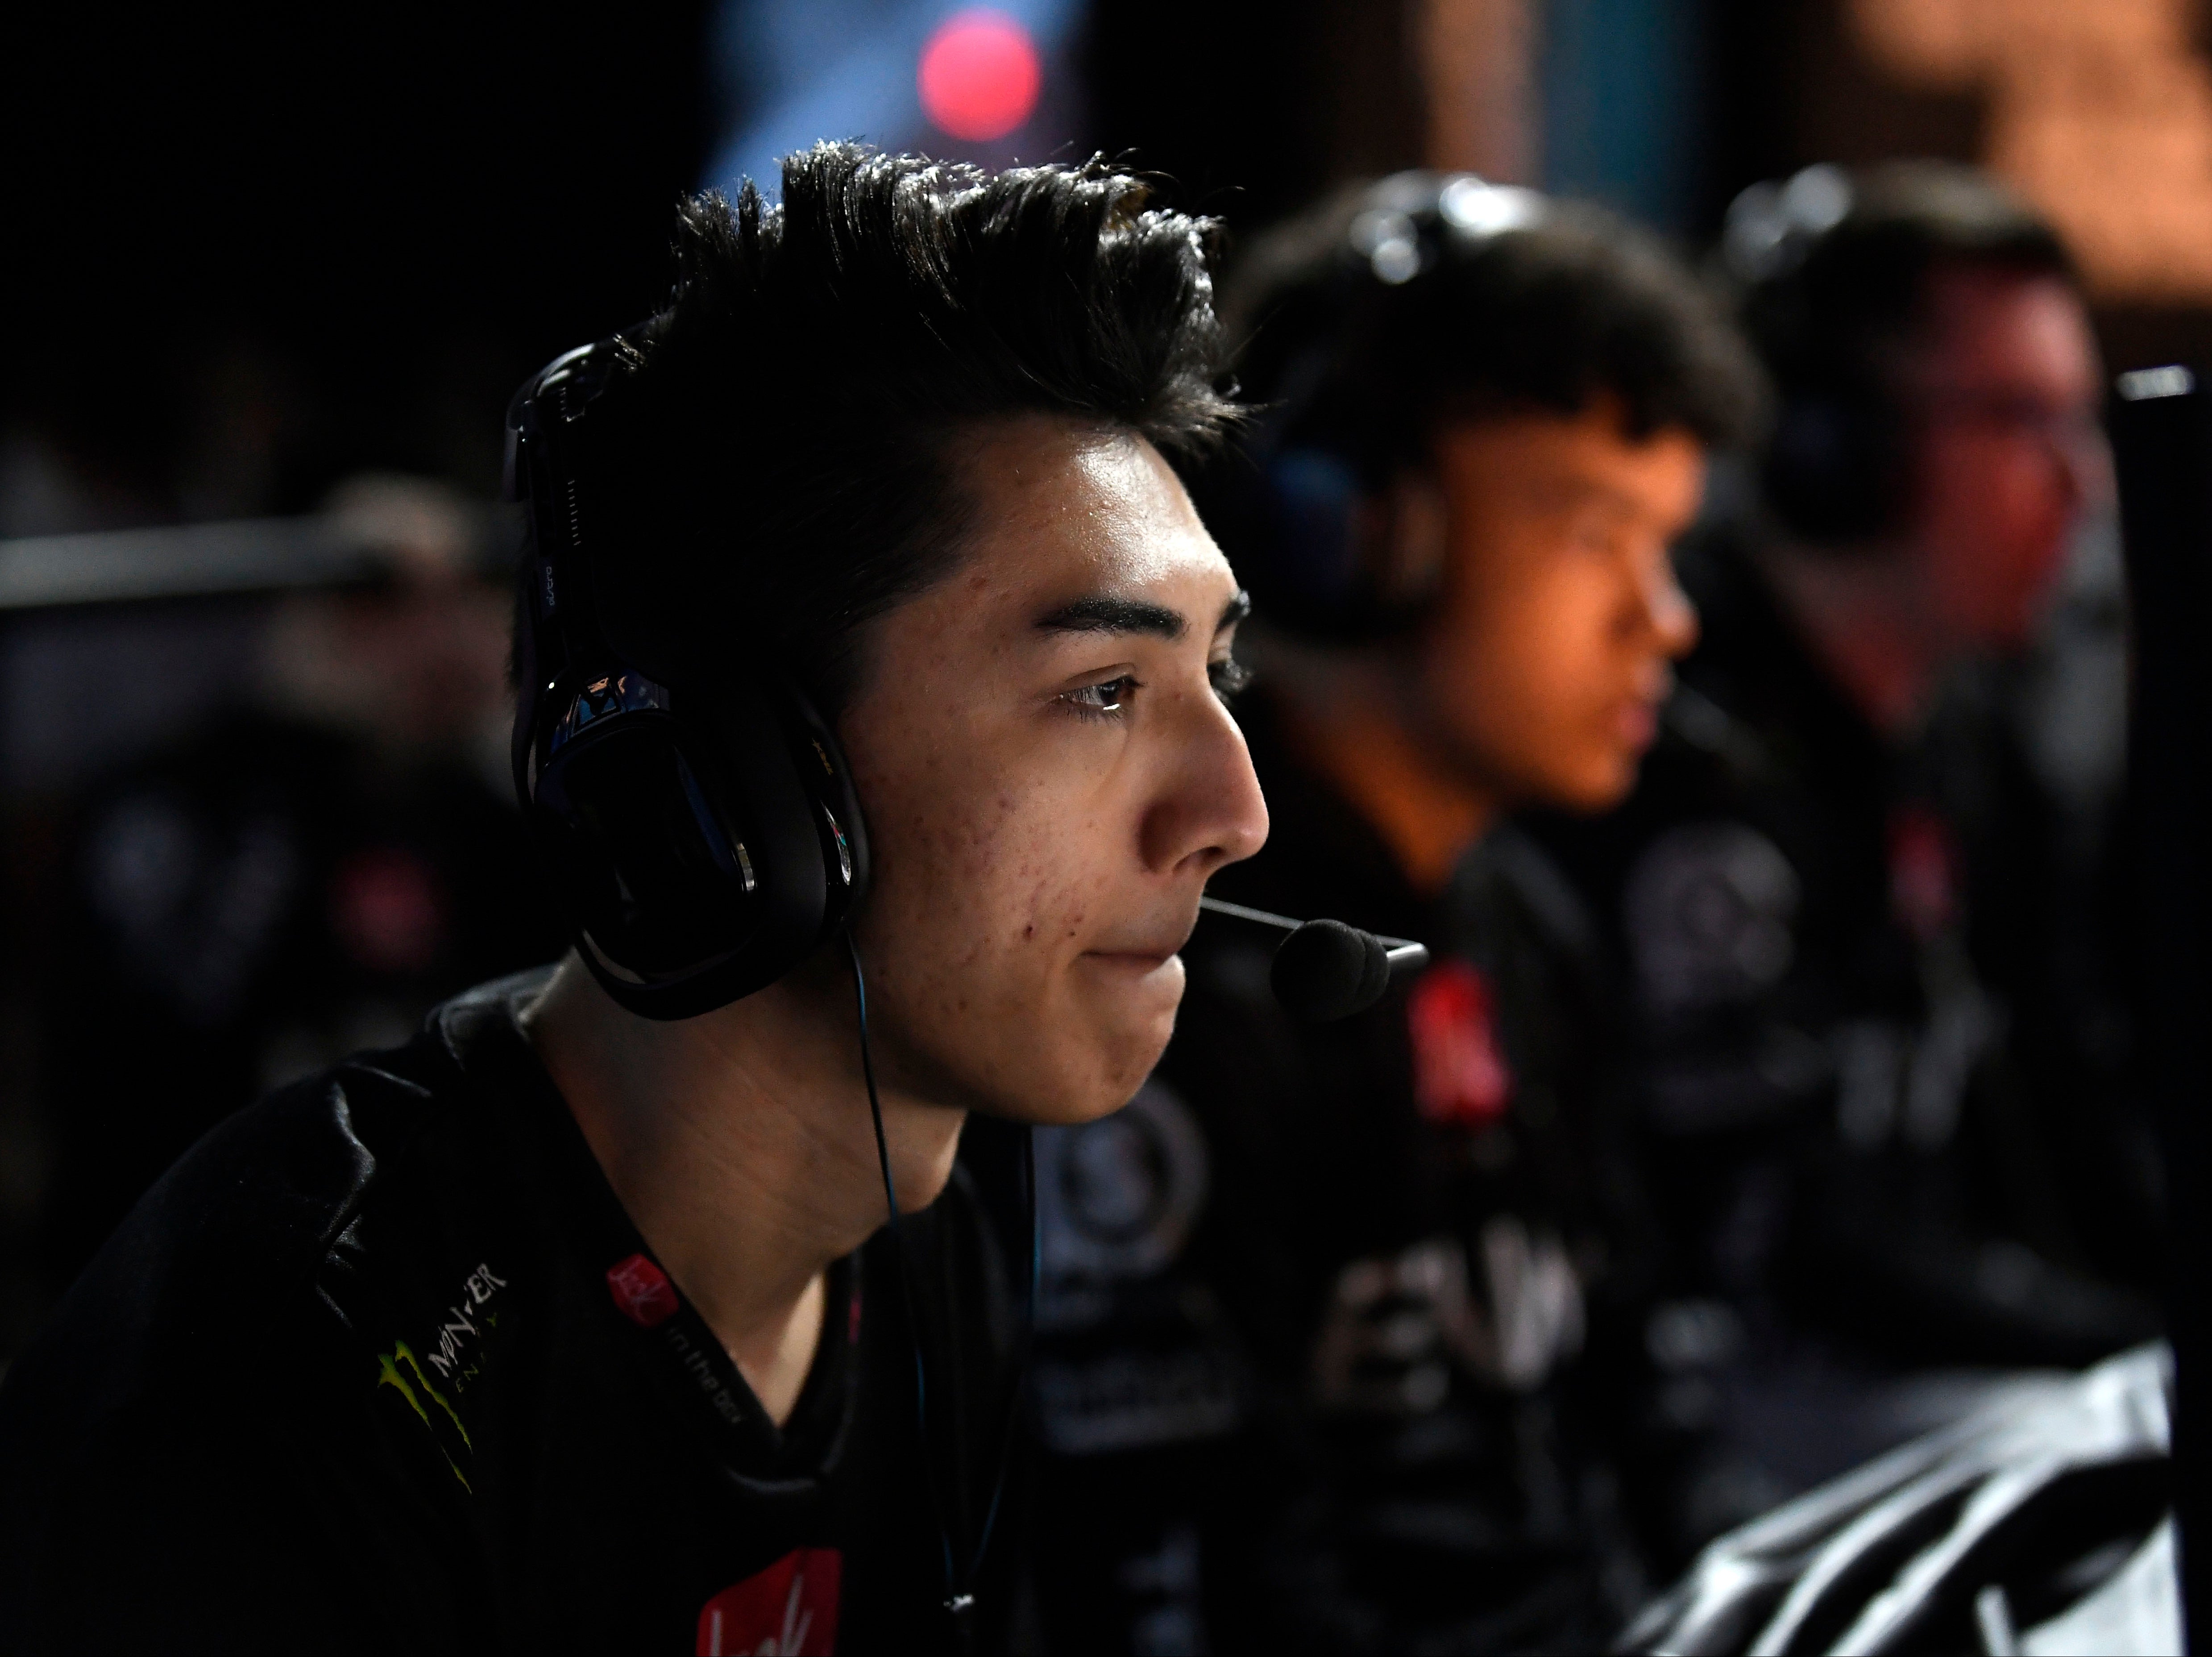 Maurice 'Fero’ Henriquez of team Envy in action against team Gen G esports during the Call of Duty World League at Anaheim Convention Center on 14 June, 2019 in Anaheim, California